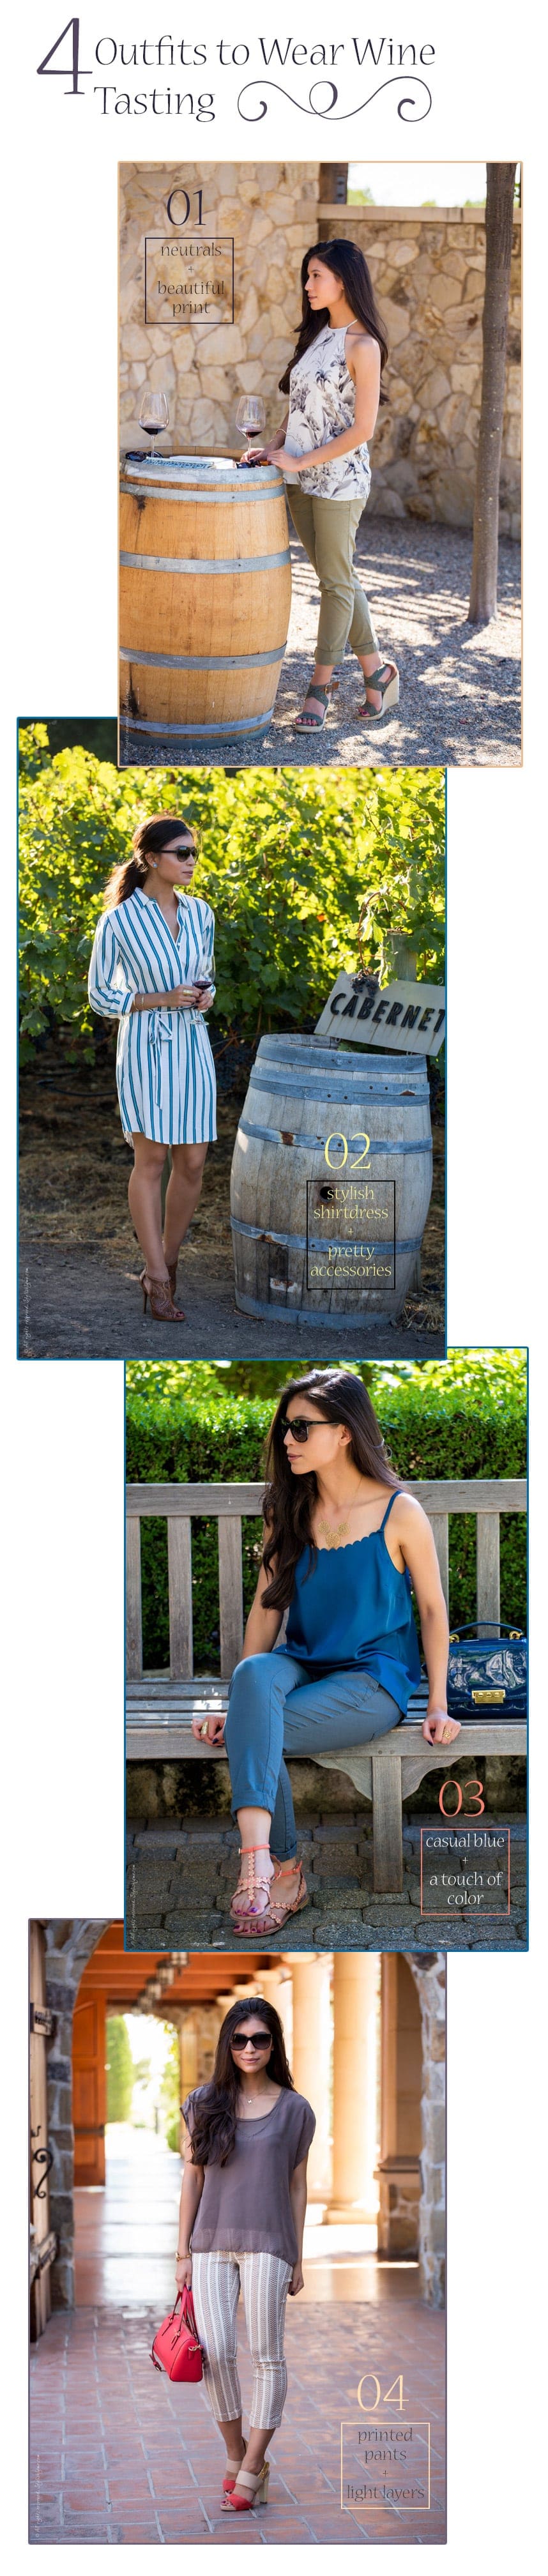 4 outfits to wear wine tasting - Visit Stylishlyme.com for more outfit inspiration and style tips